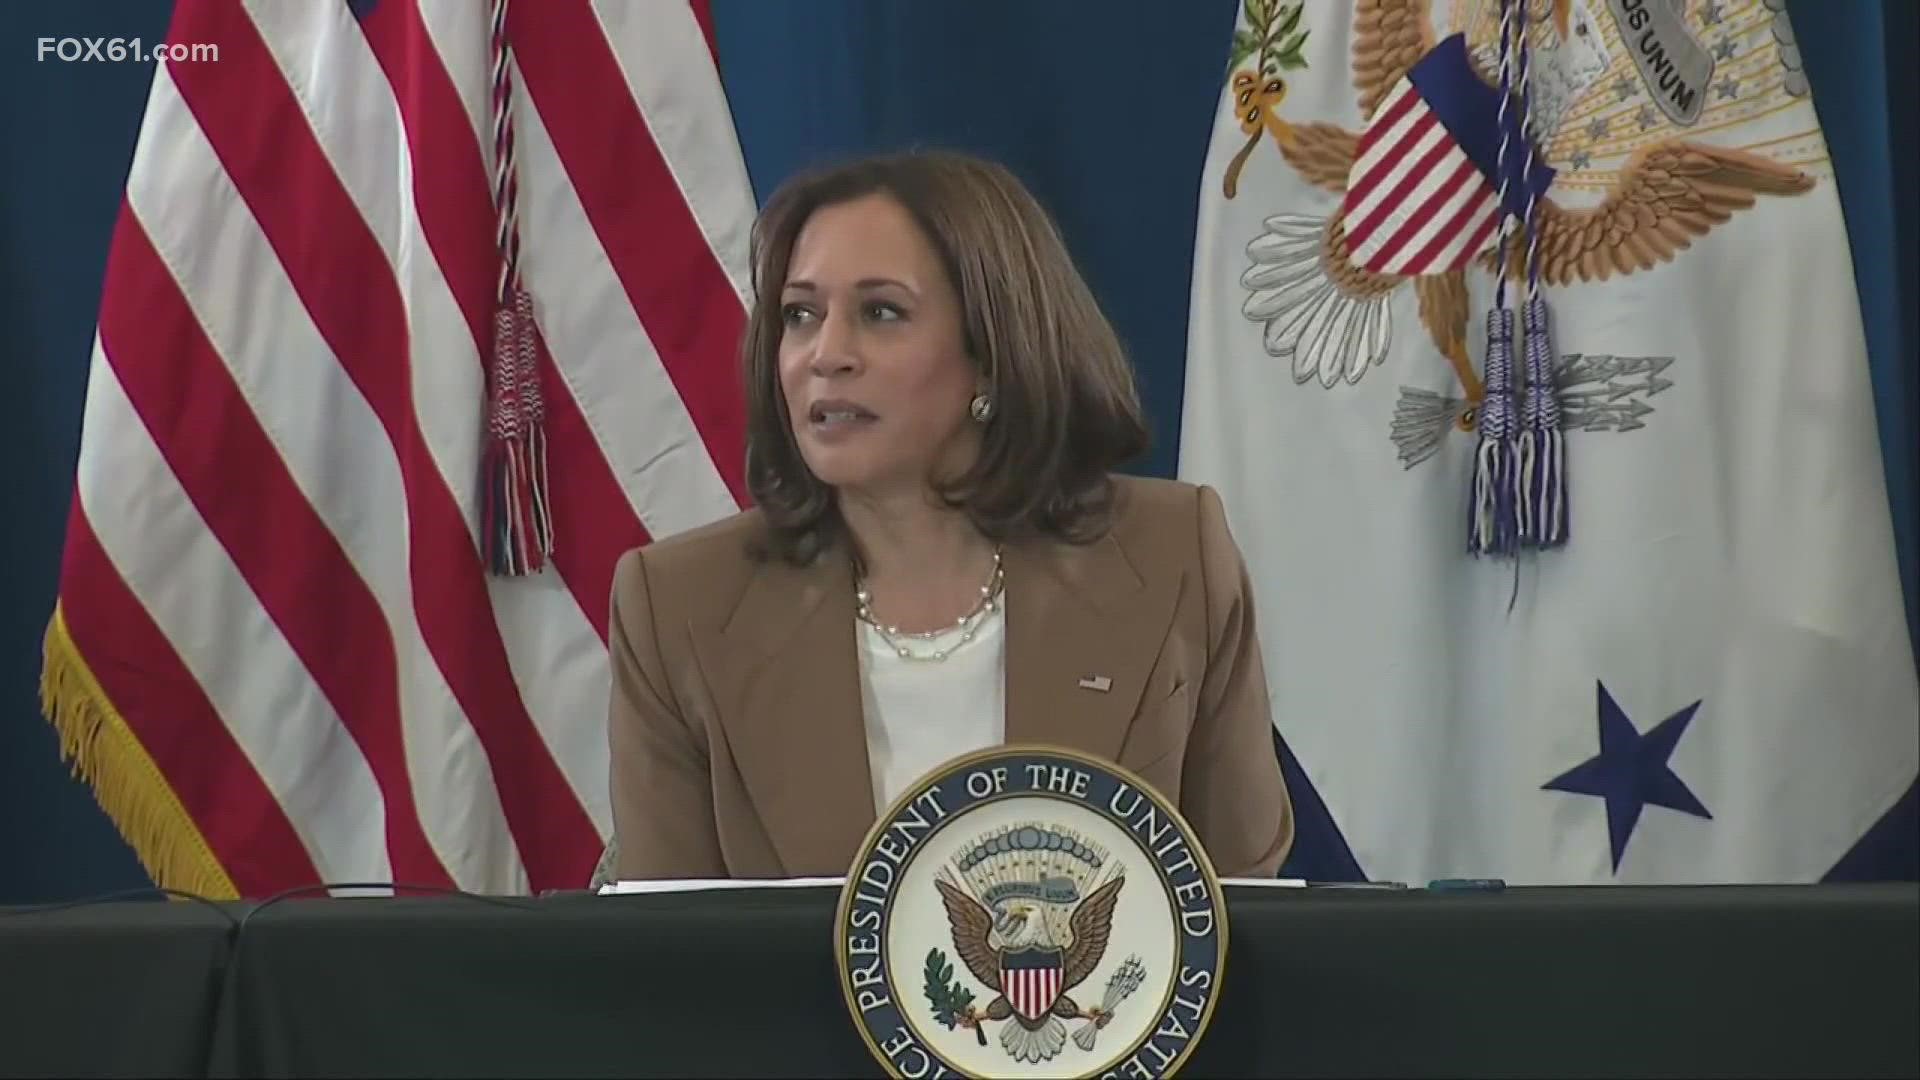 Vice President Kamala Harris will travel to the school Wednesday afternoon to take part in an abortion rights discussion.